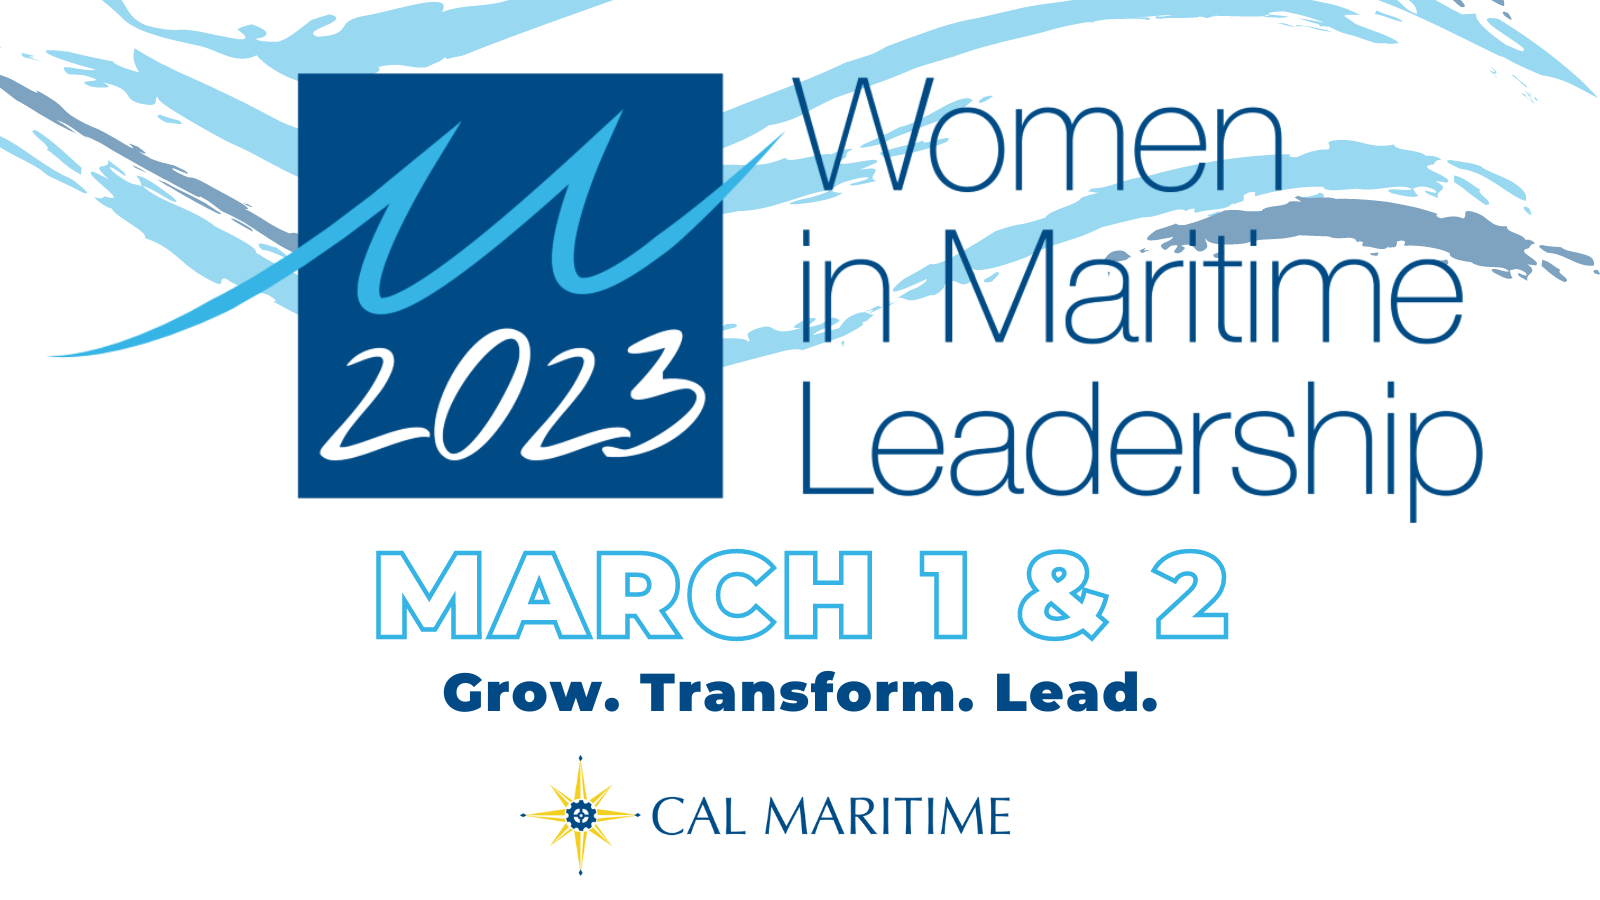 12th Annual Women In Maritime Leadership Conference, March 1 & 2, Grow. Transform. Lead.